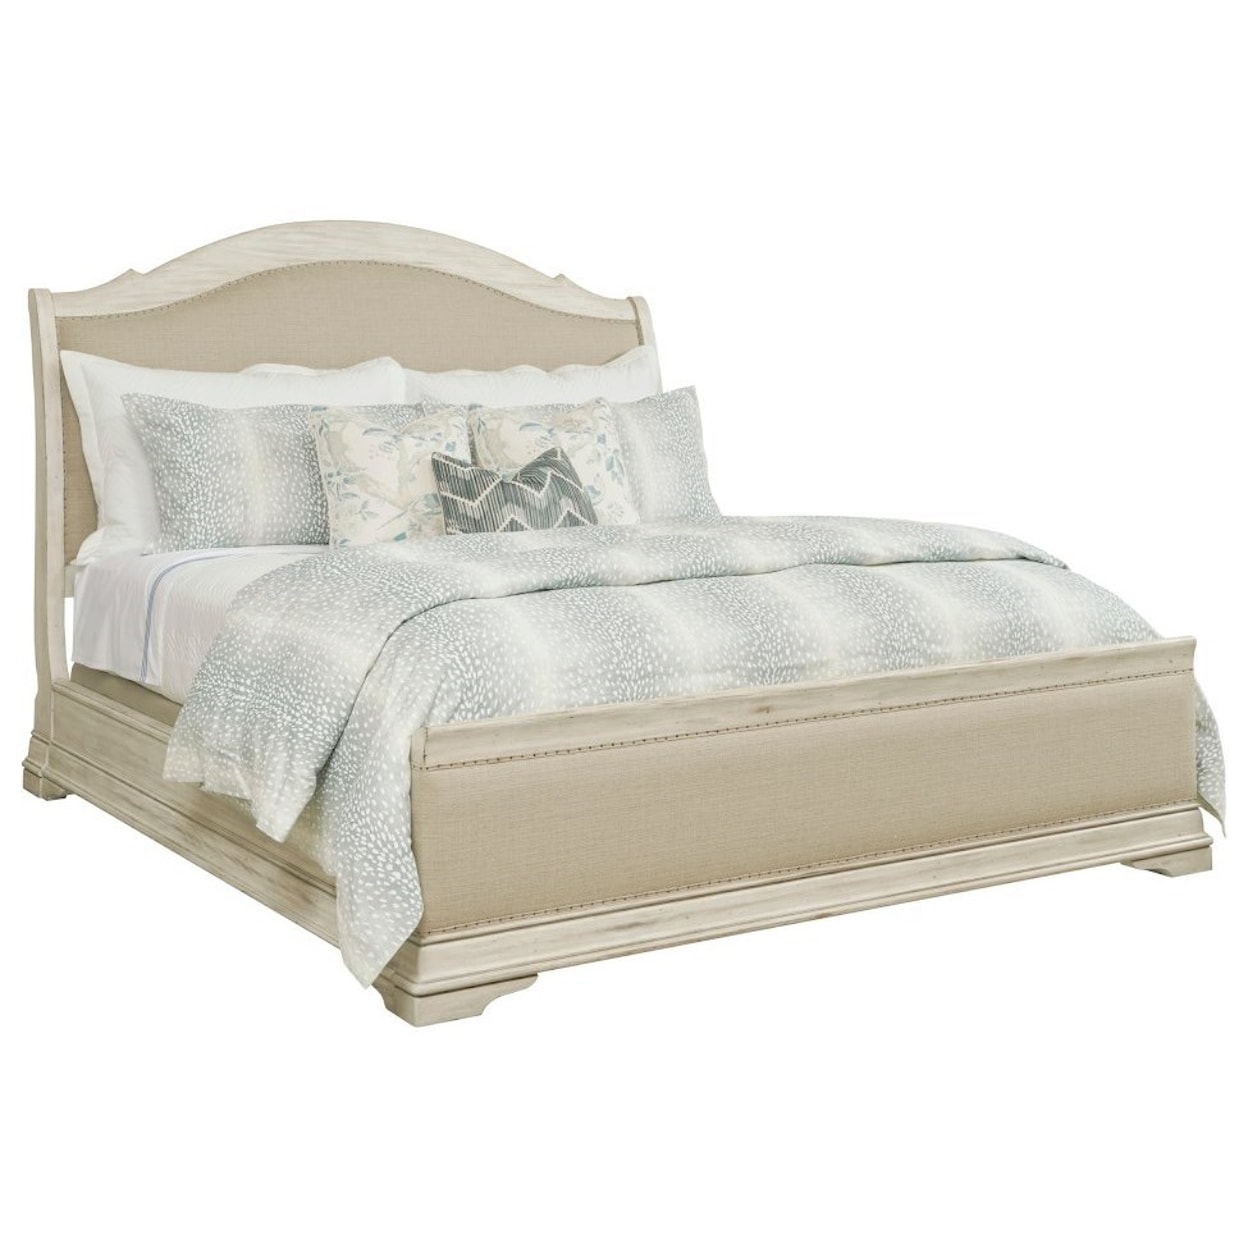 Kincaid Furniture Selwyn Kelly Queen Upholstered Sleigh Bed